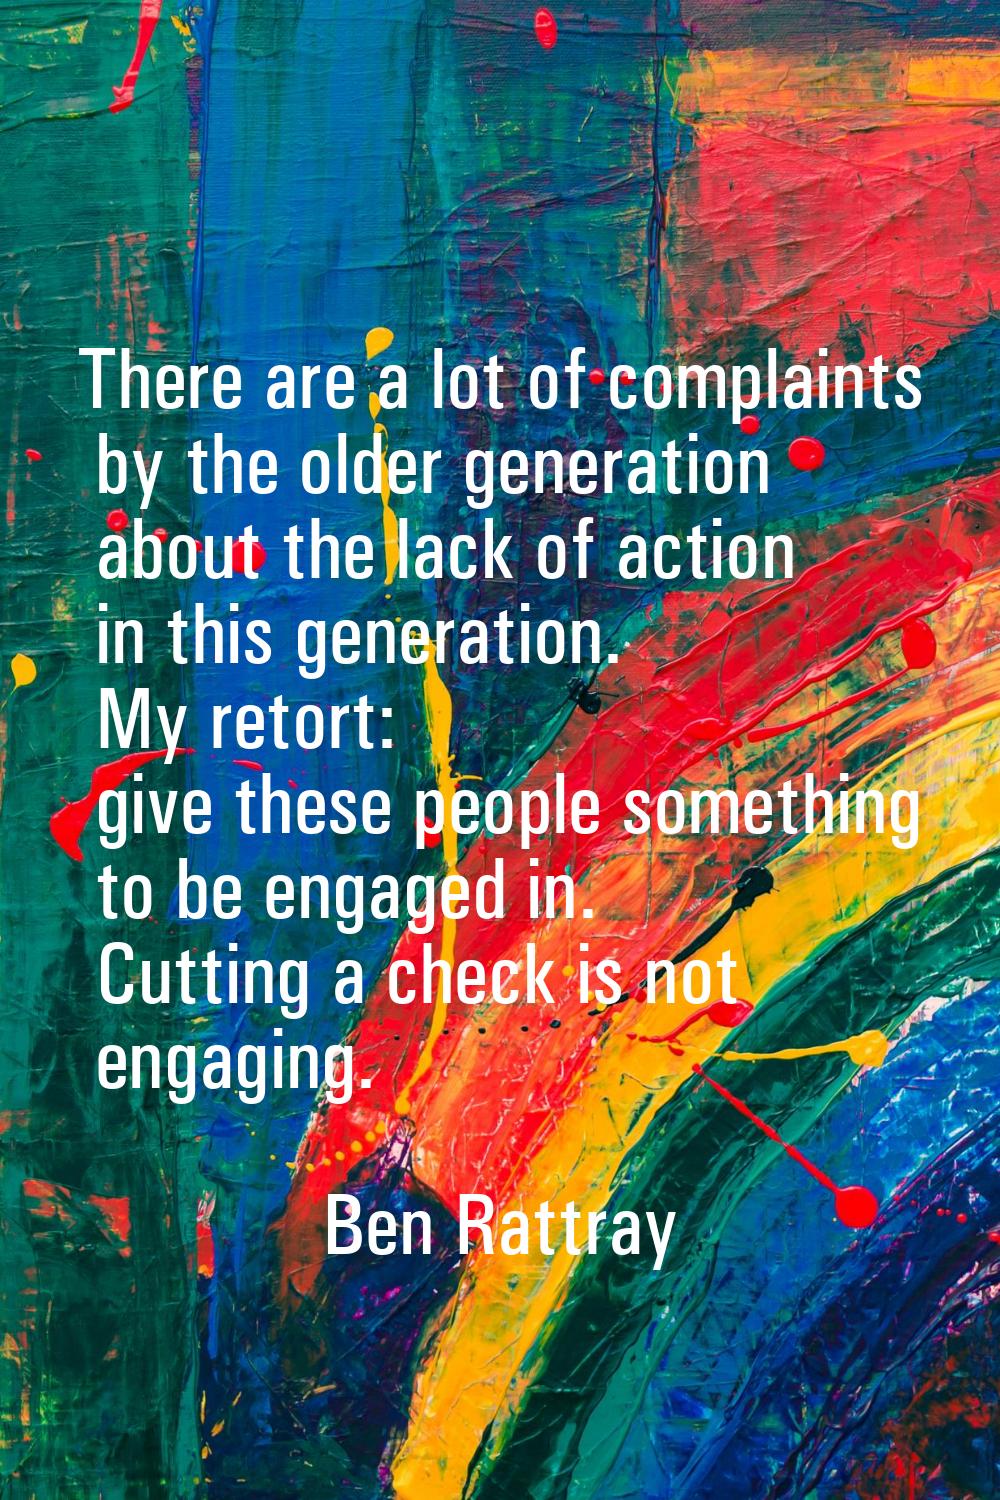 There are a lot of complaints by the older generation about the lack of action in this generation. 